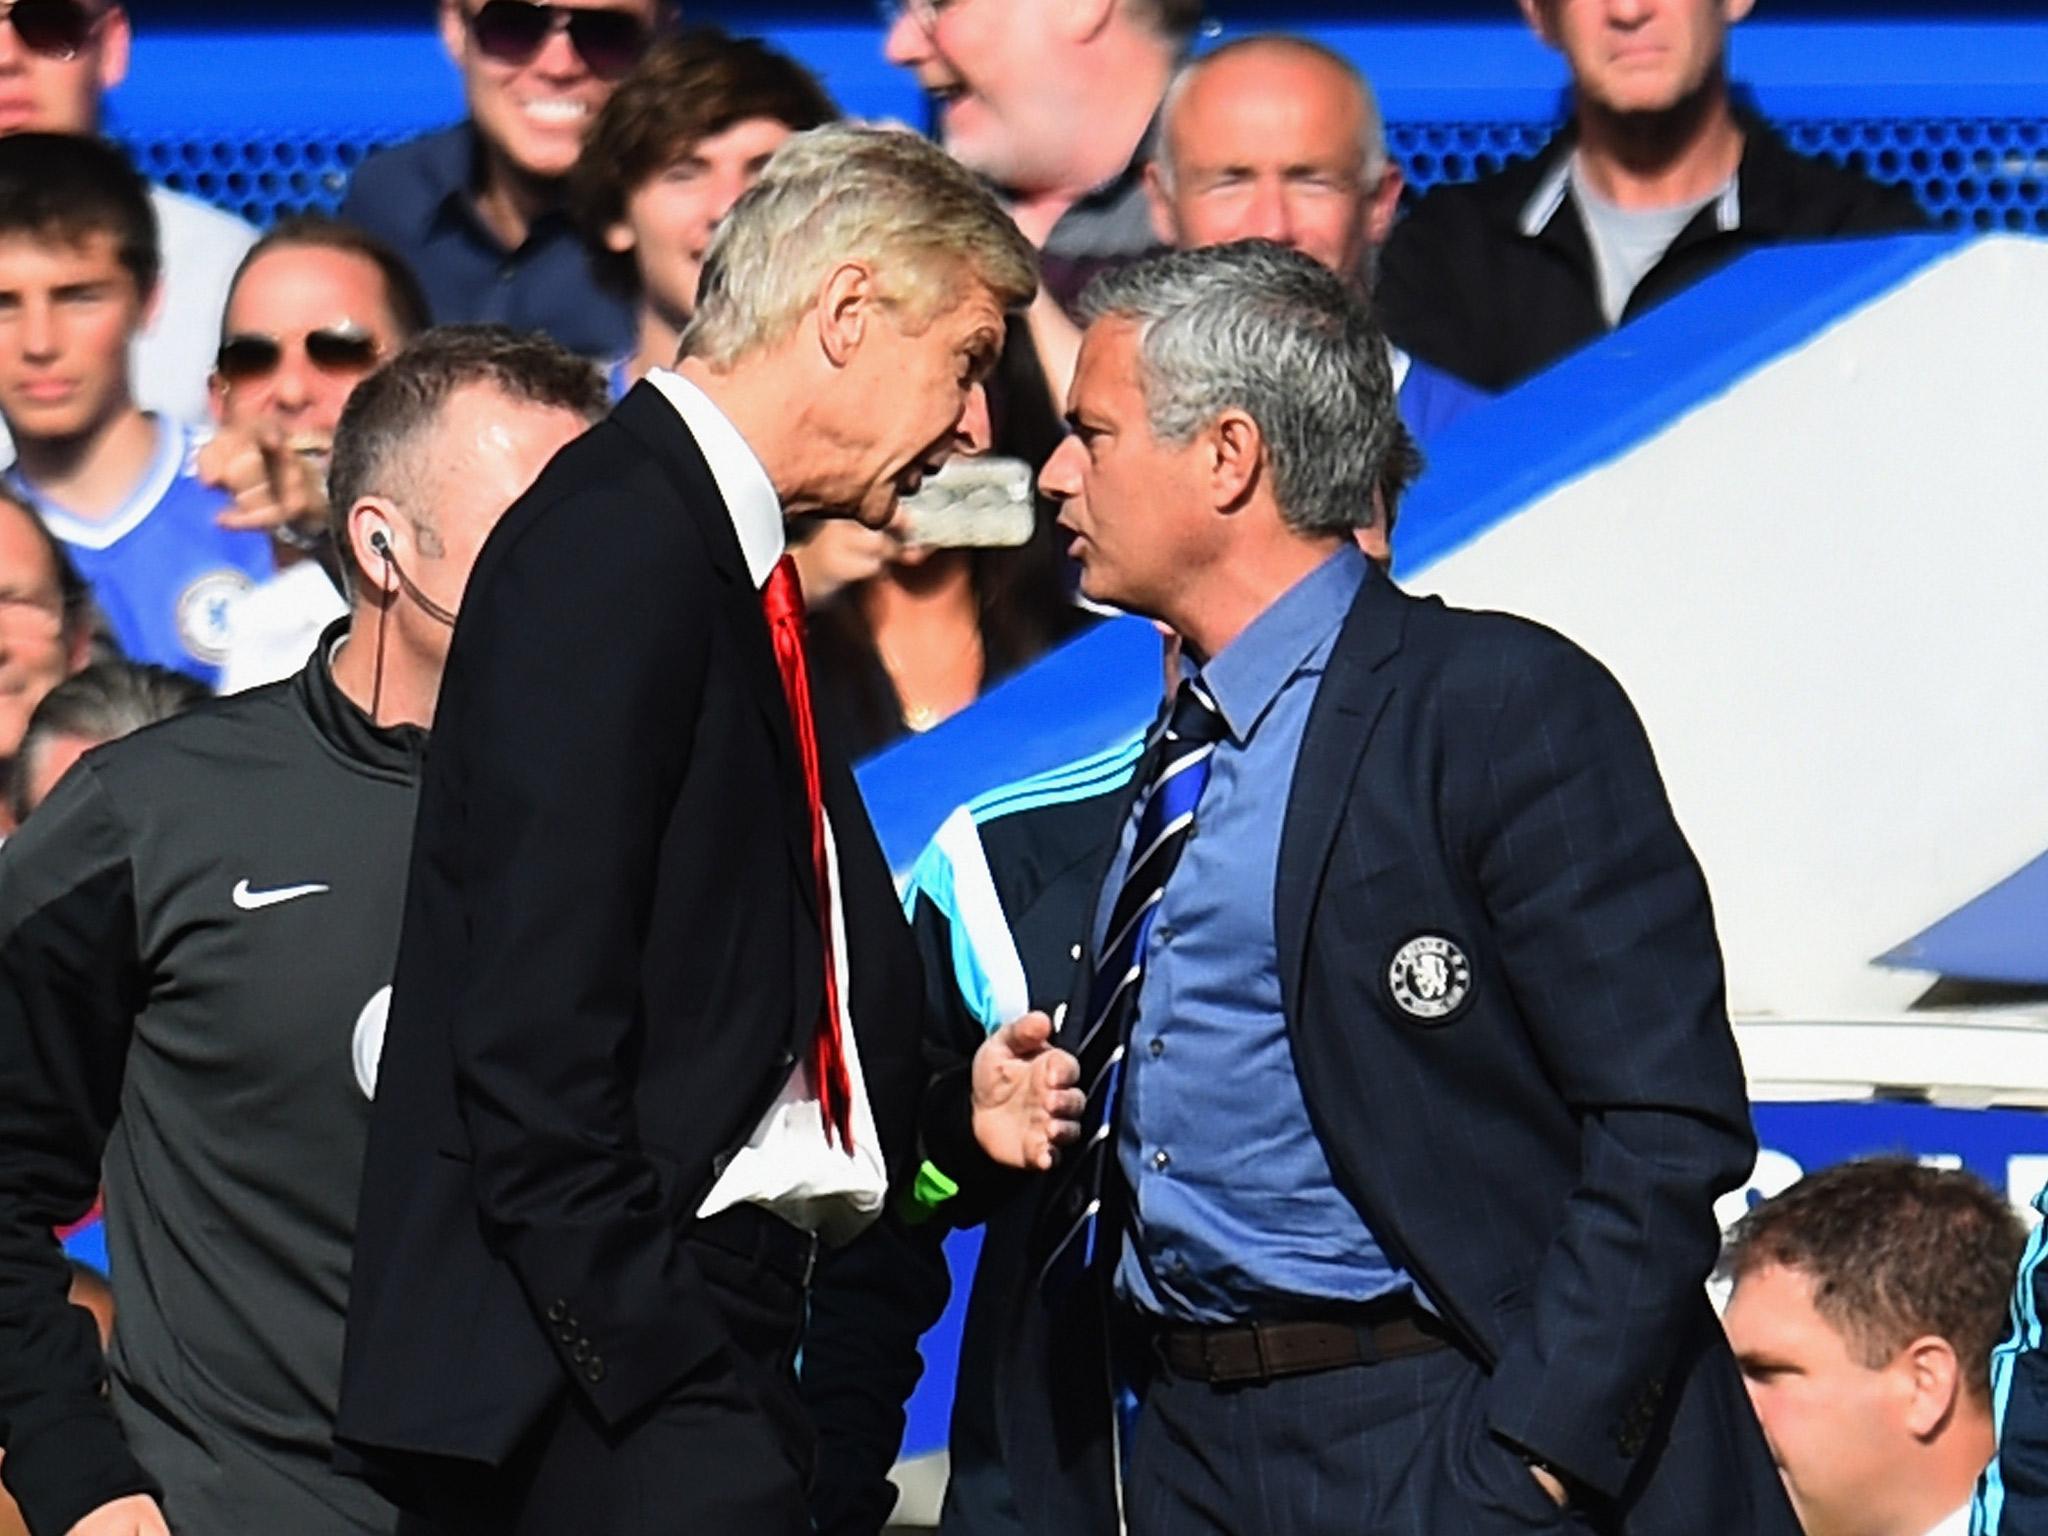 Jose Mourinho and Arsene Wenger came to blow on the touchline in 2015